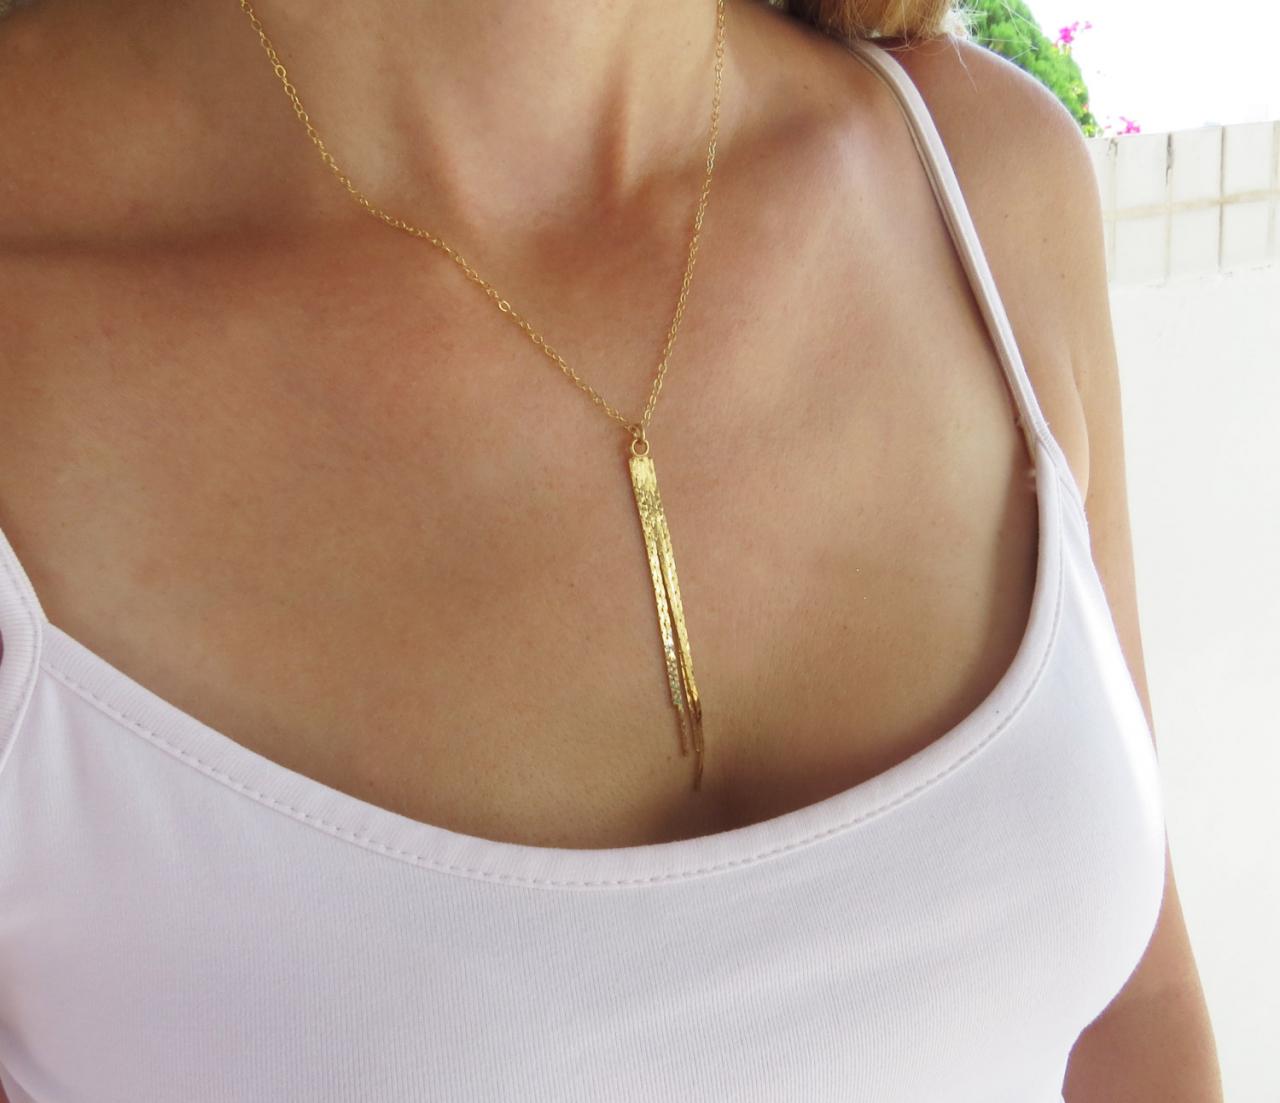 Gold Necklace, Long Pendant Necklace, Gold Tassel Pendant Necklace, Layerd Gold Necklace, Bridesmaid Gift, Delicate Gold Necklace